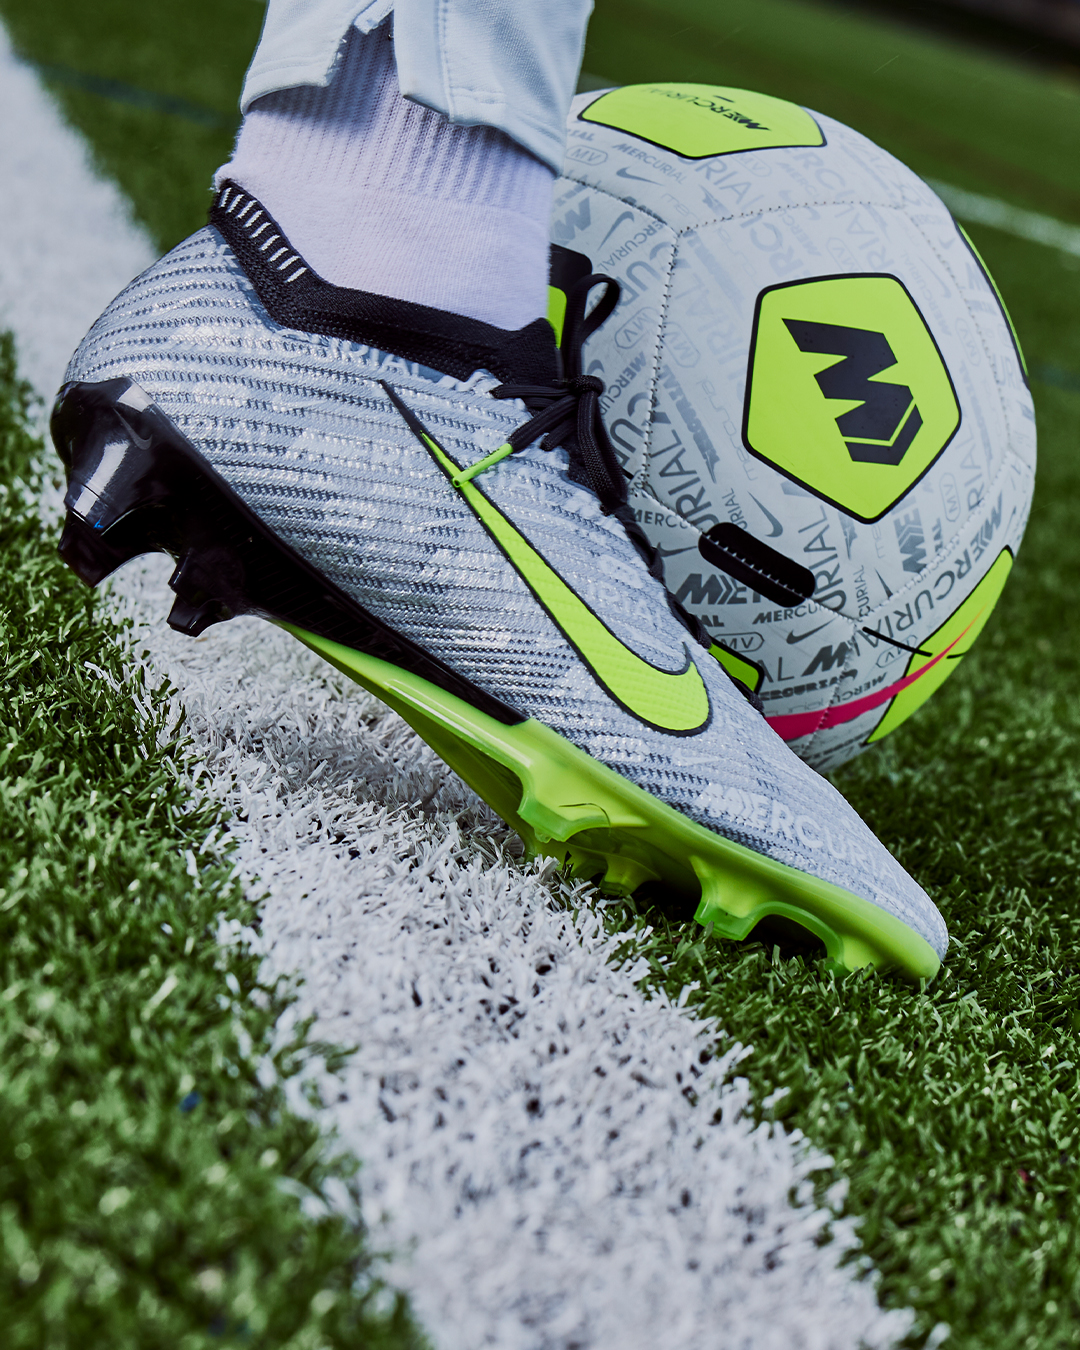 Just In: Nike Football Boots Have Arrived! Ultra Football, 55% OFF